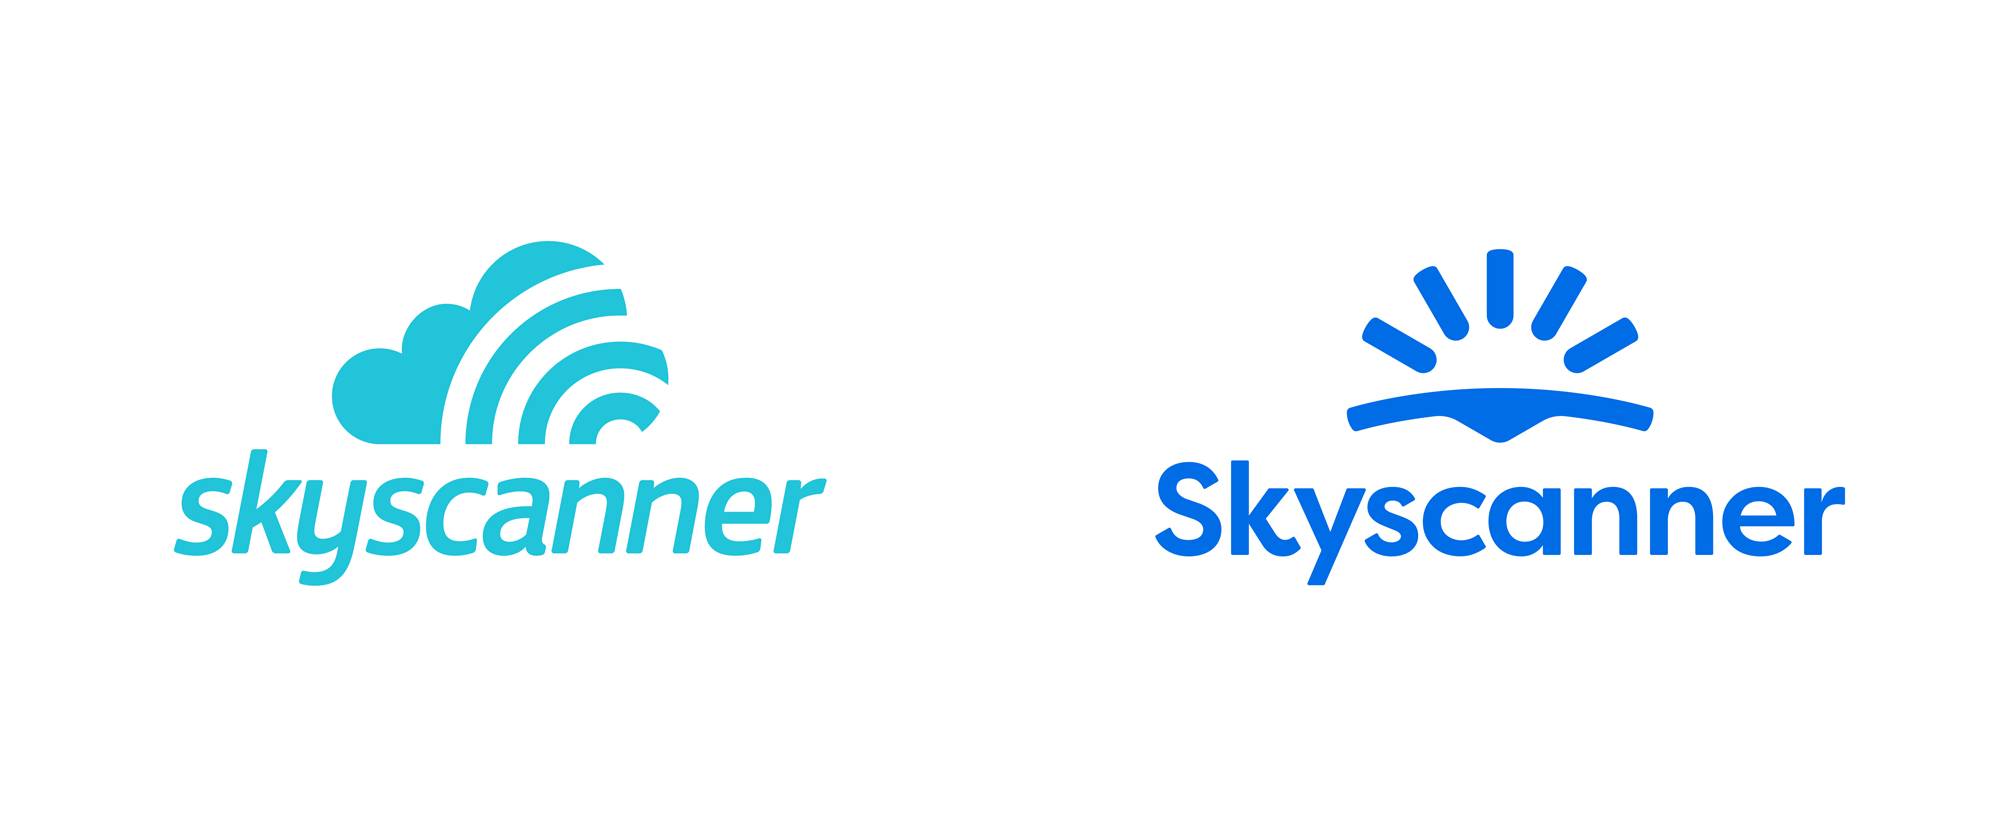 , Skyscanner introduced a new logo and corporate identity